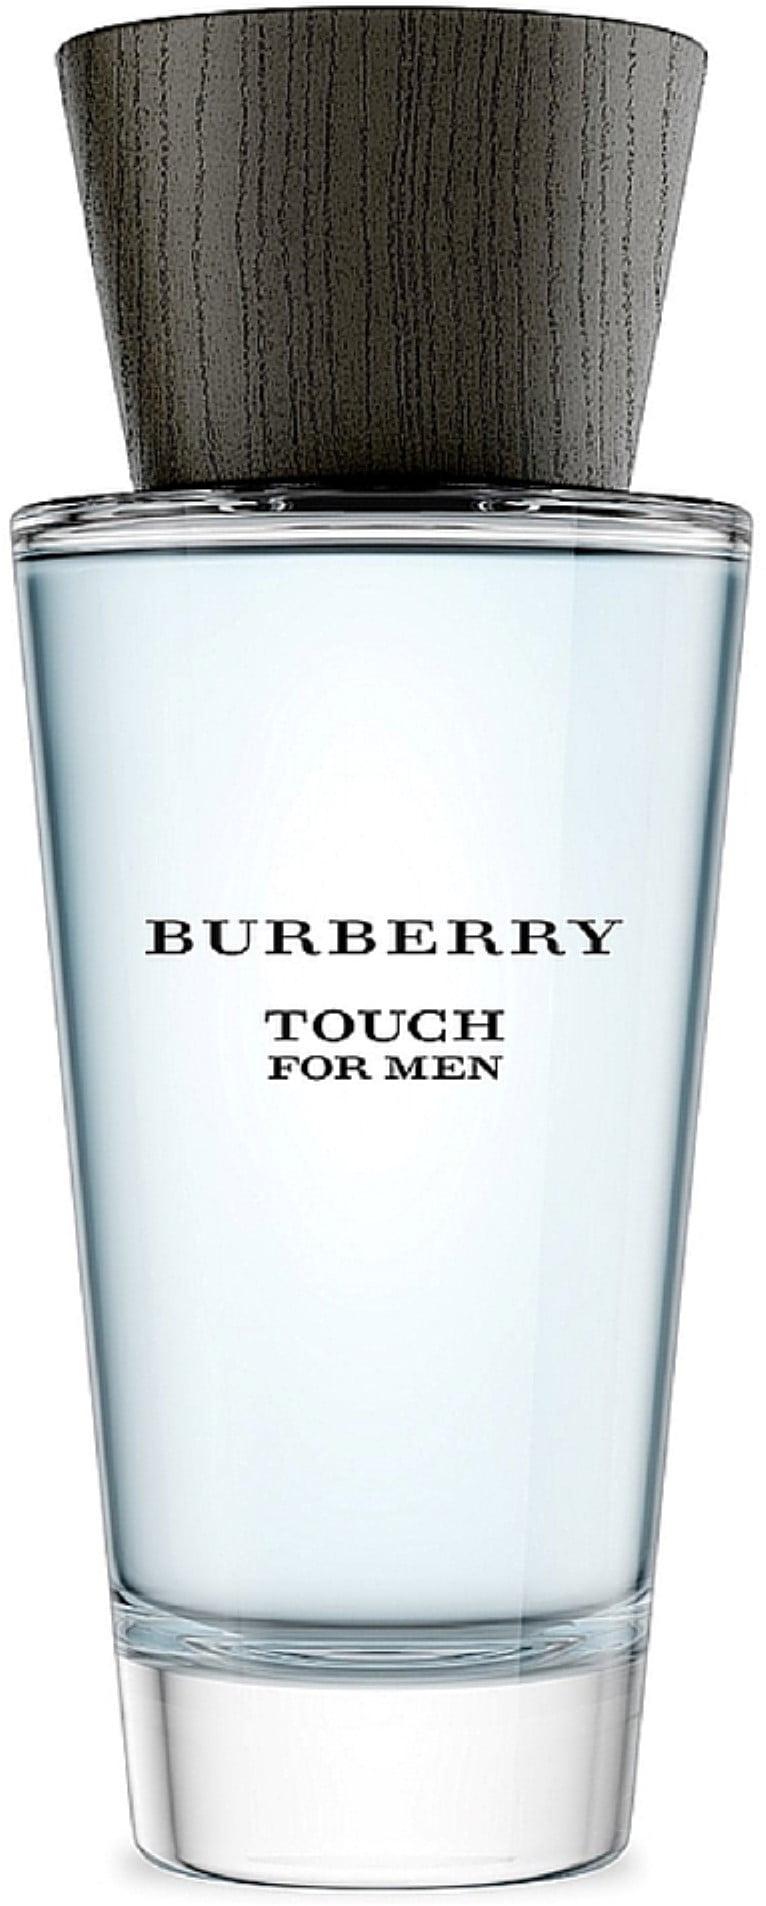 Burberry Touch Cologne for Men, 3.3 Oz 